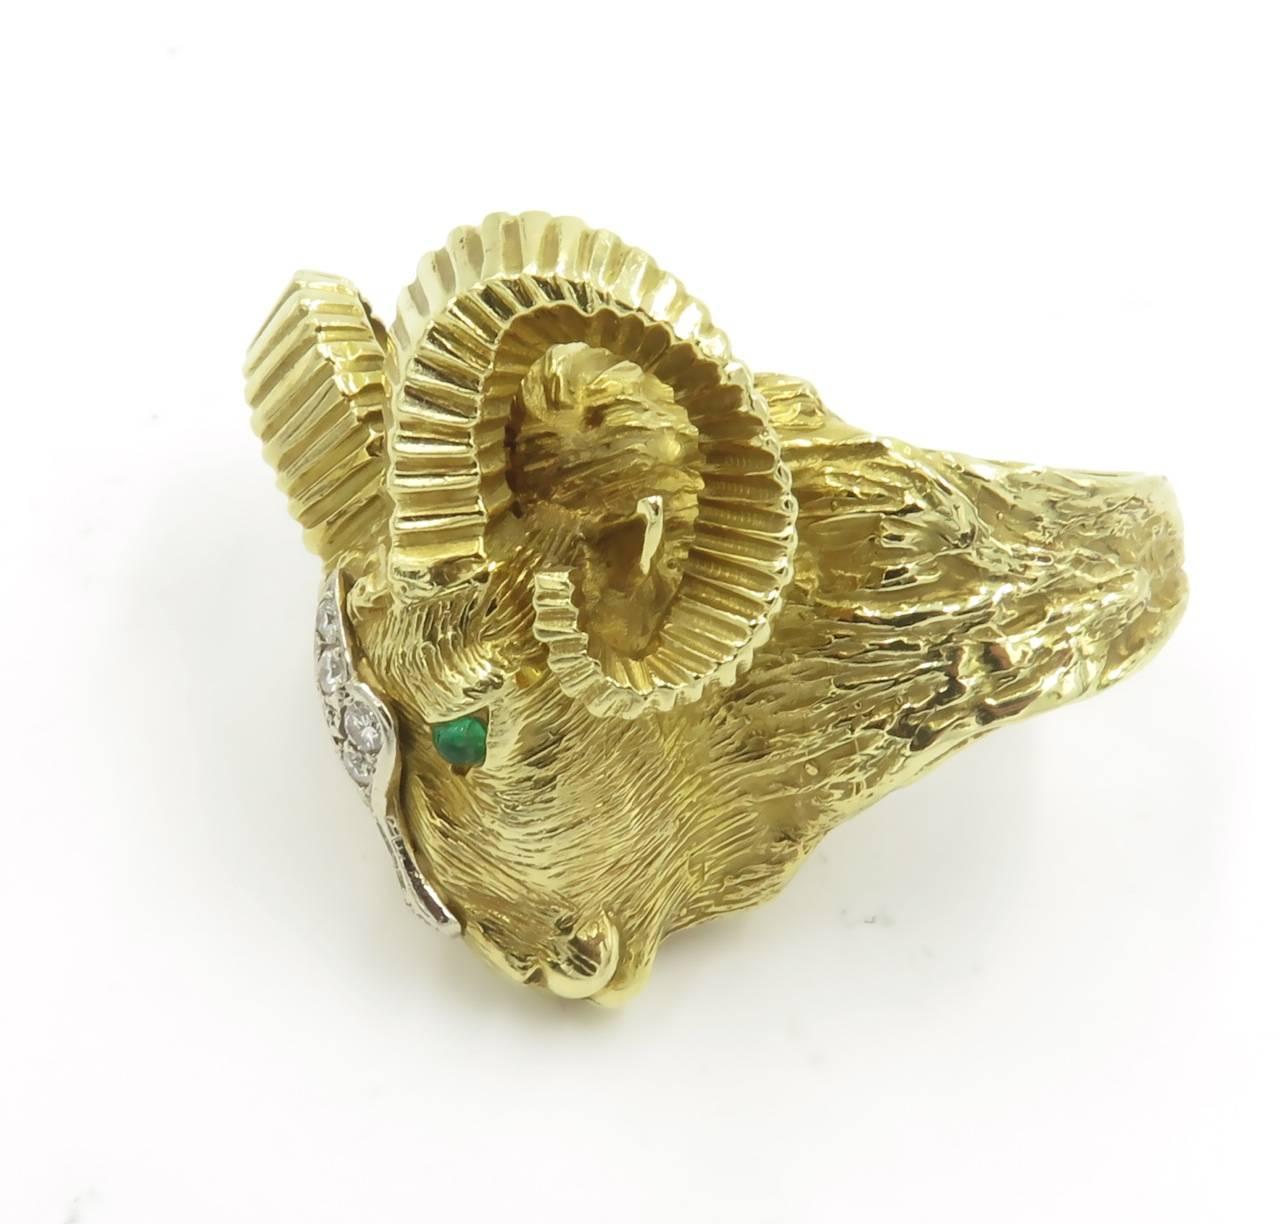 A 14 karat yellow gold, diamond and emerald ram’s head ring, La Triomphe. Circa 1960. The textured gold ring with fluted gold horns, enhanced by cabochon emerald eyes and circular-cut diamond detail. Six (6) circular-cut diamonds, weigh